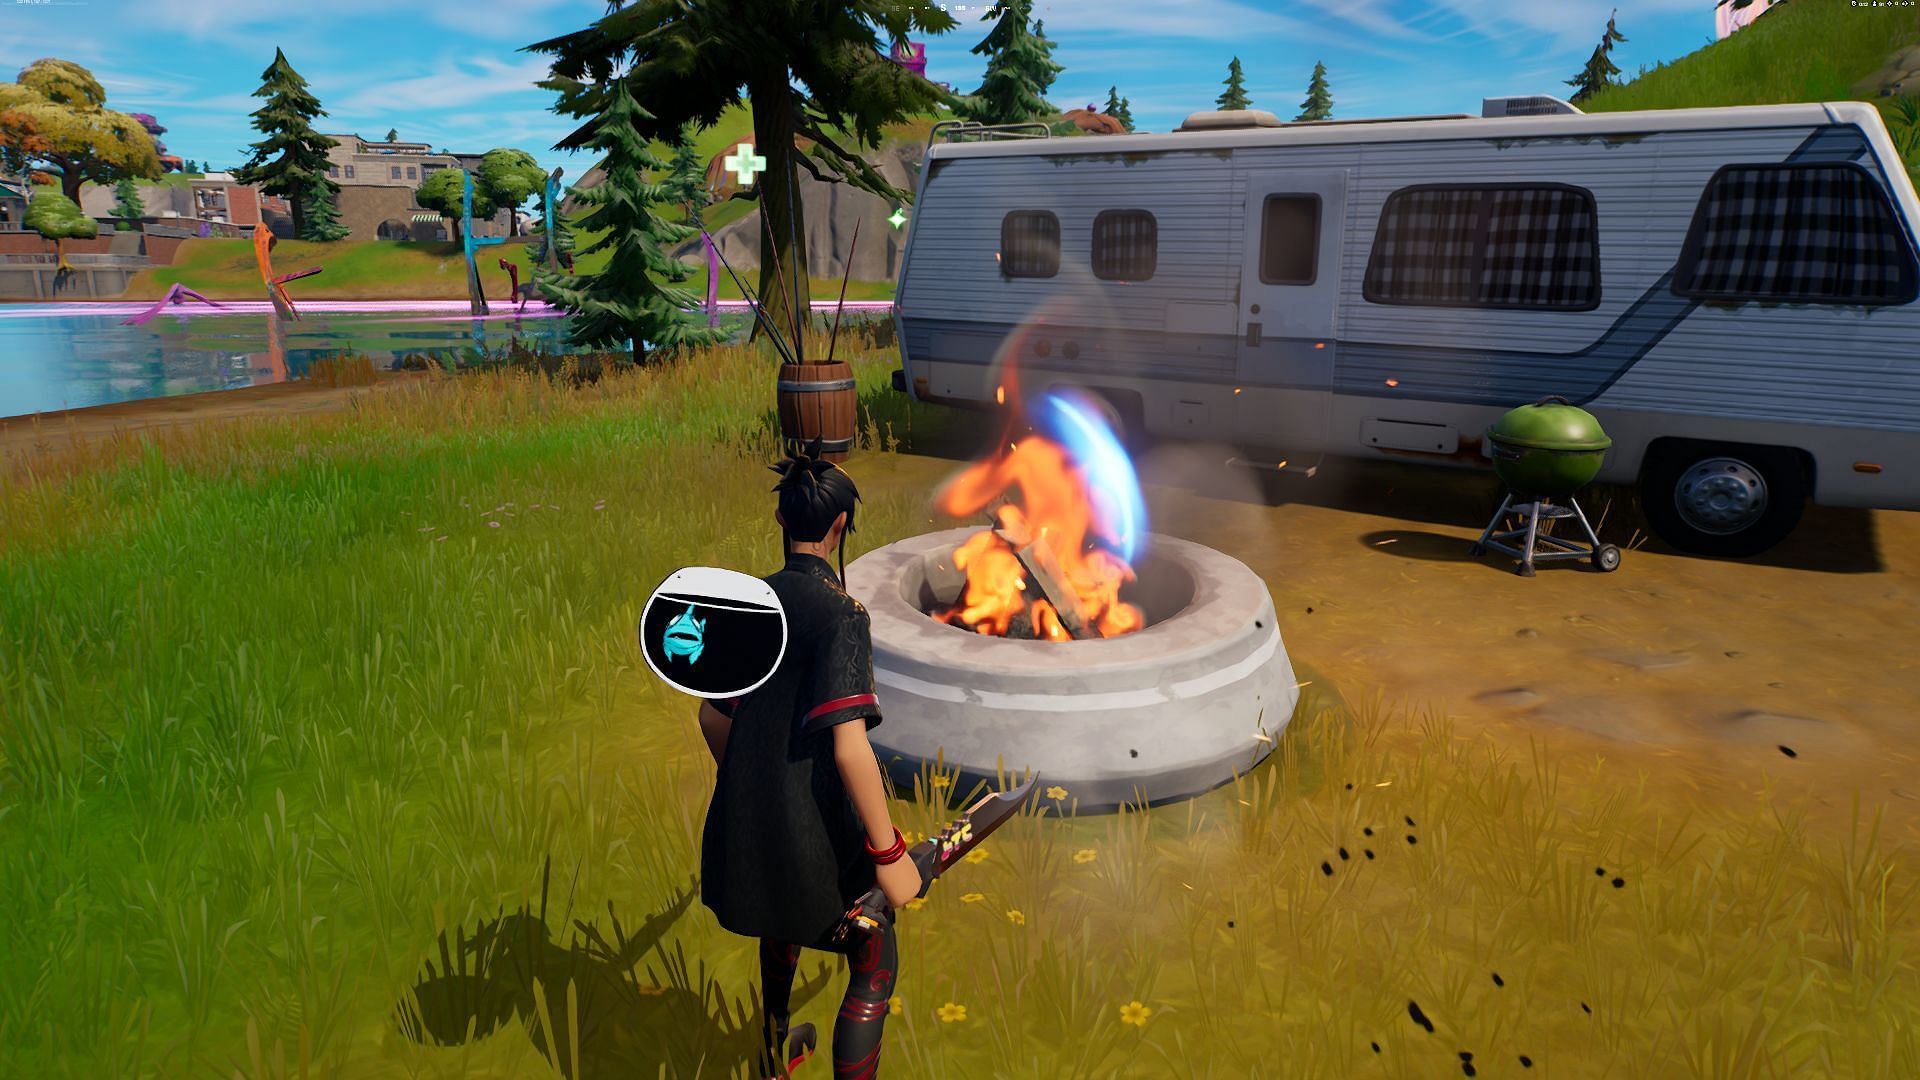 Stay toasty and heal around campfires on the island (Image via Fortnite)